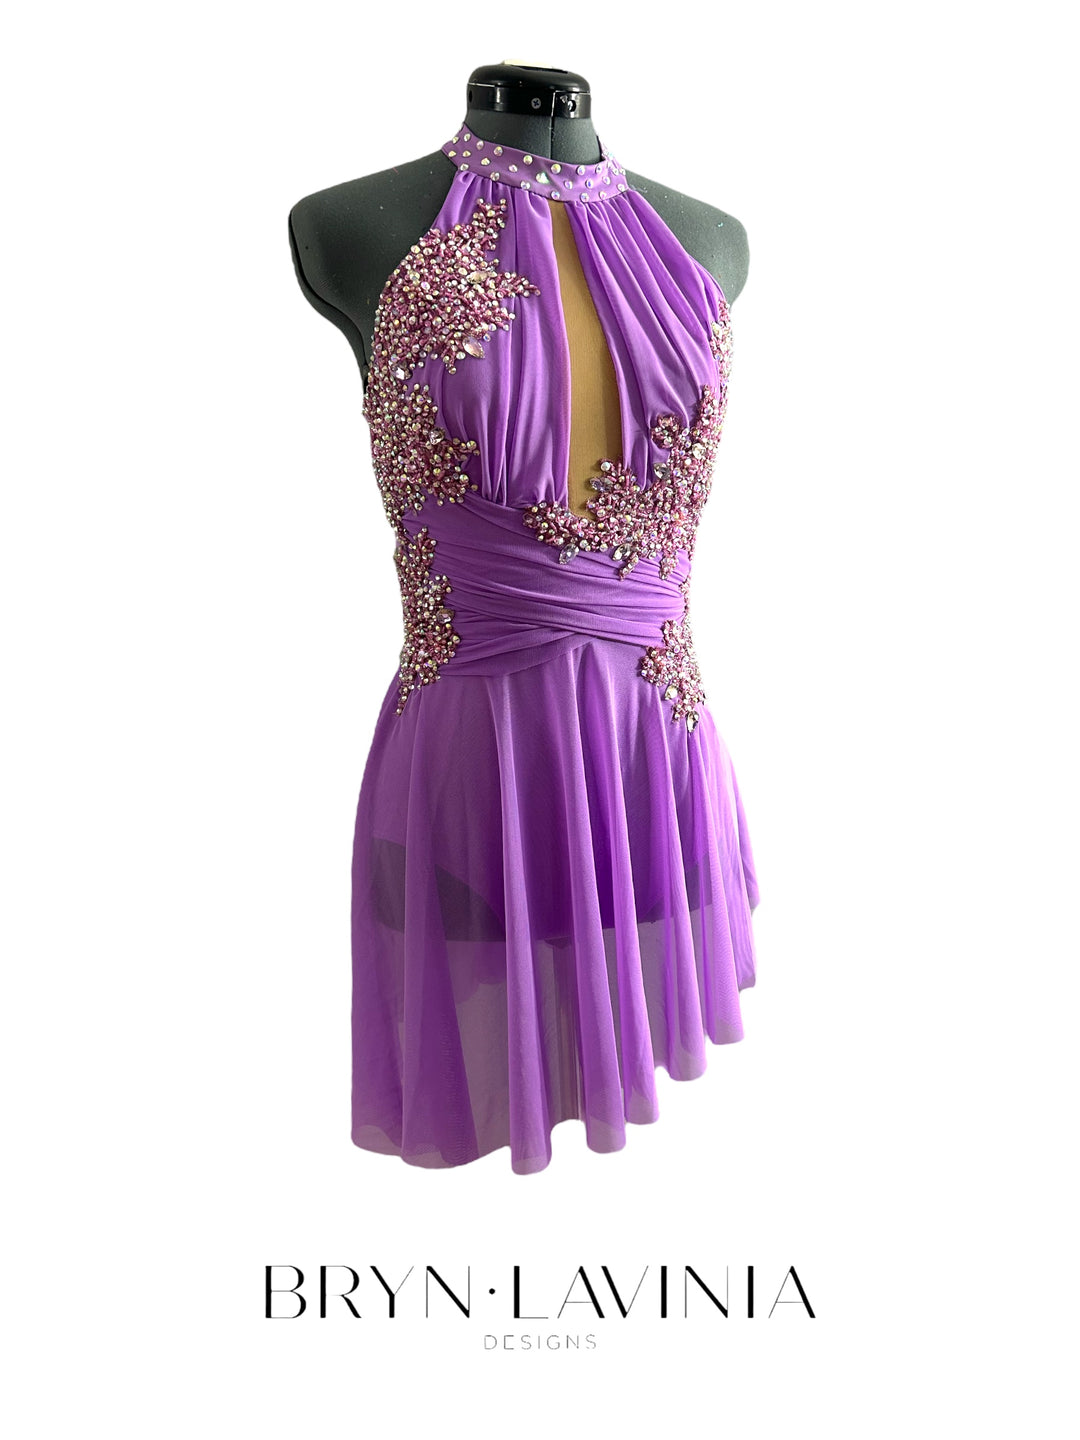 NEW Adult Small orchid purple ready to ship costume